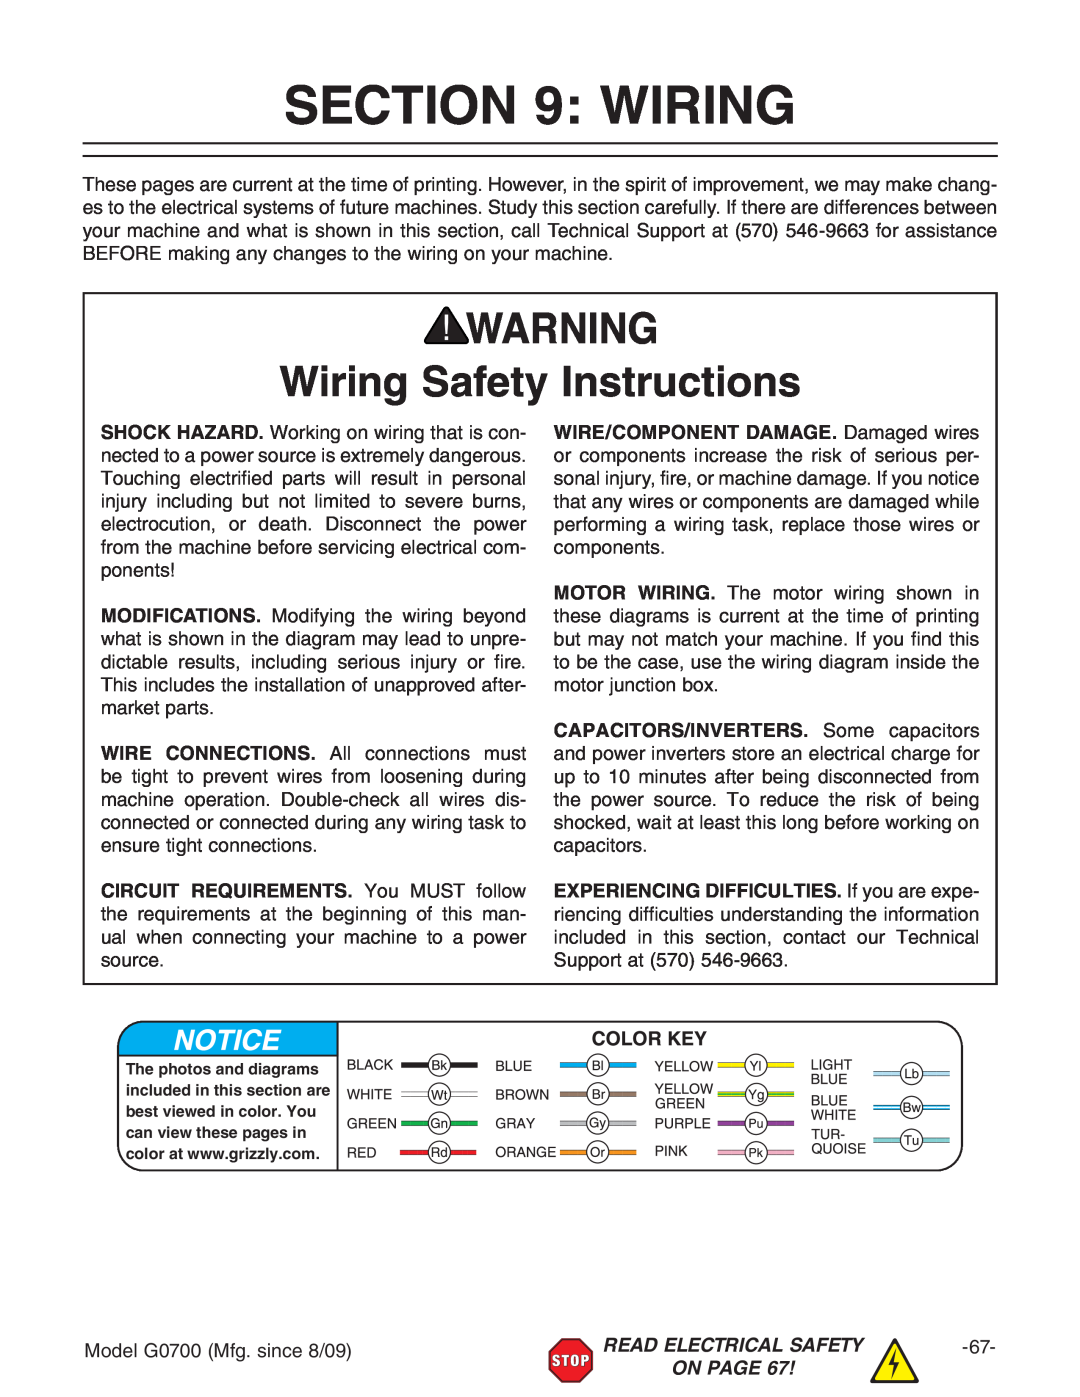 Grizzly G0700 owner manual Wiring Safety Instructions 